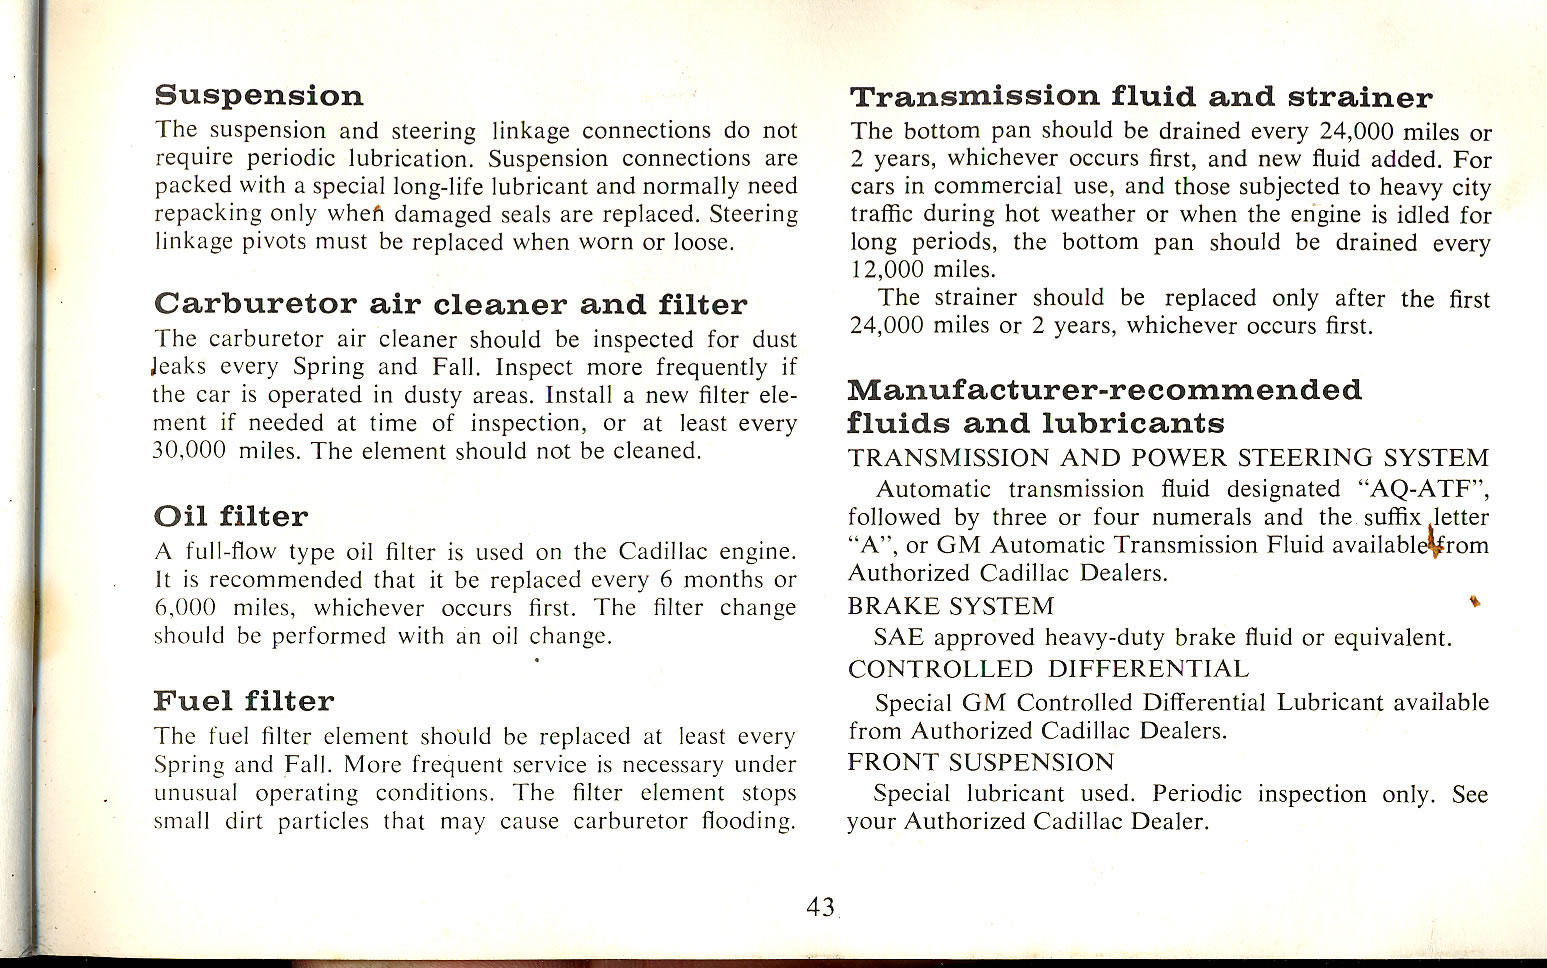 1965 Cadillac Owners Manual Page 46